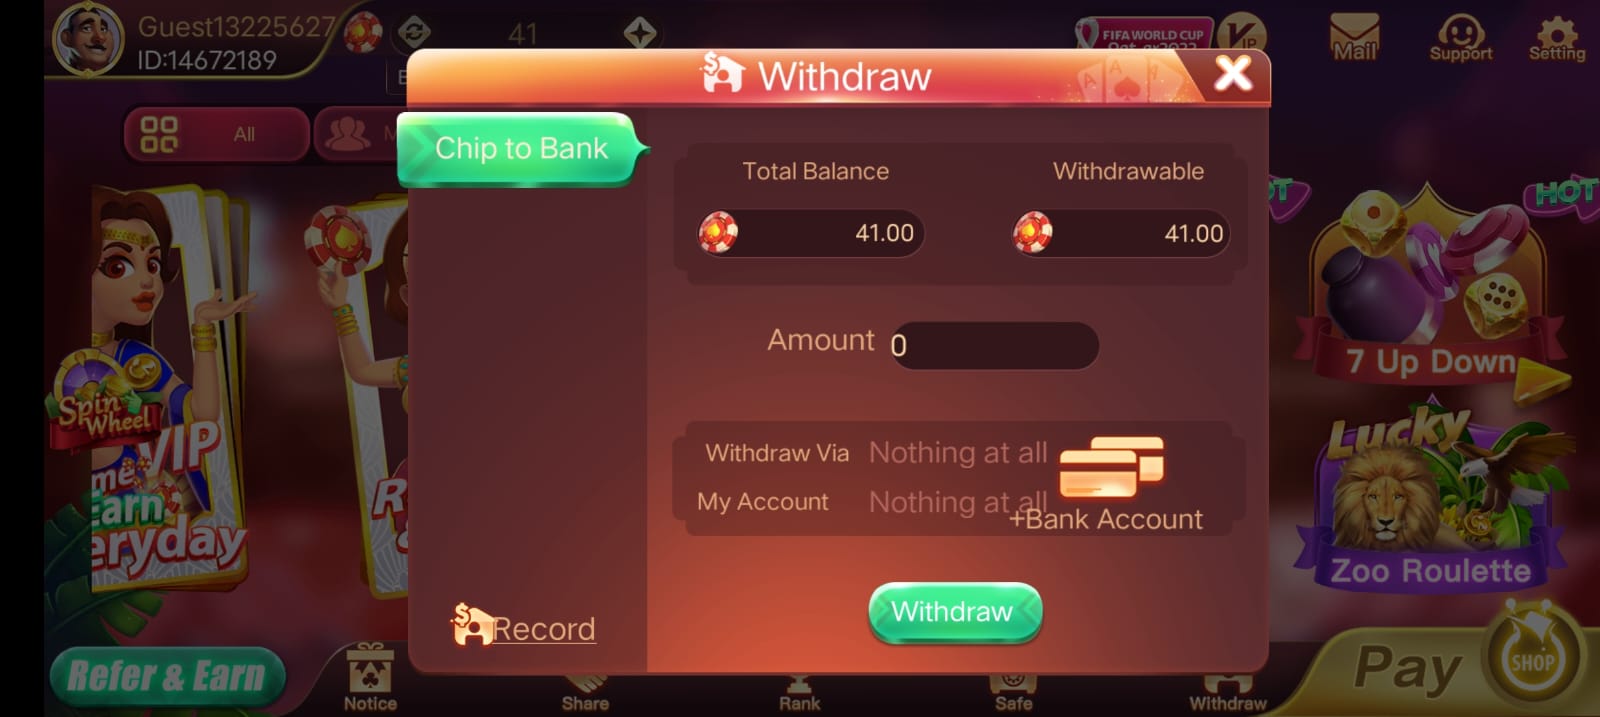 Withdrawal Money In Rummy Wealth Application